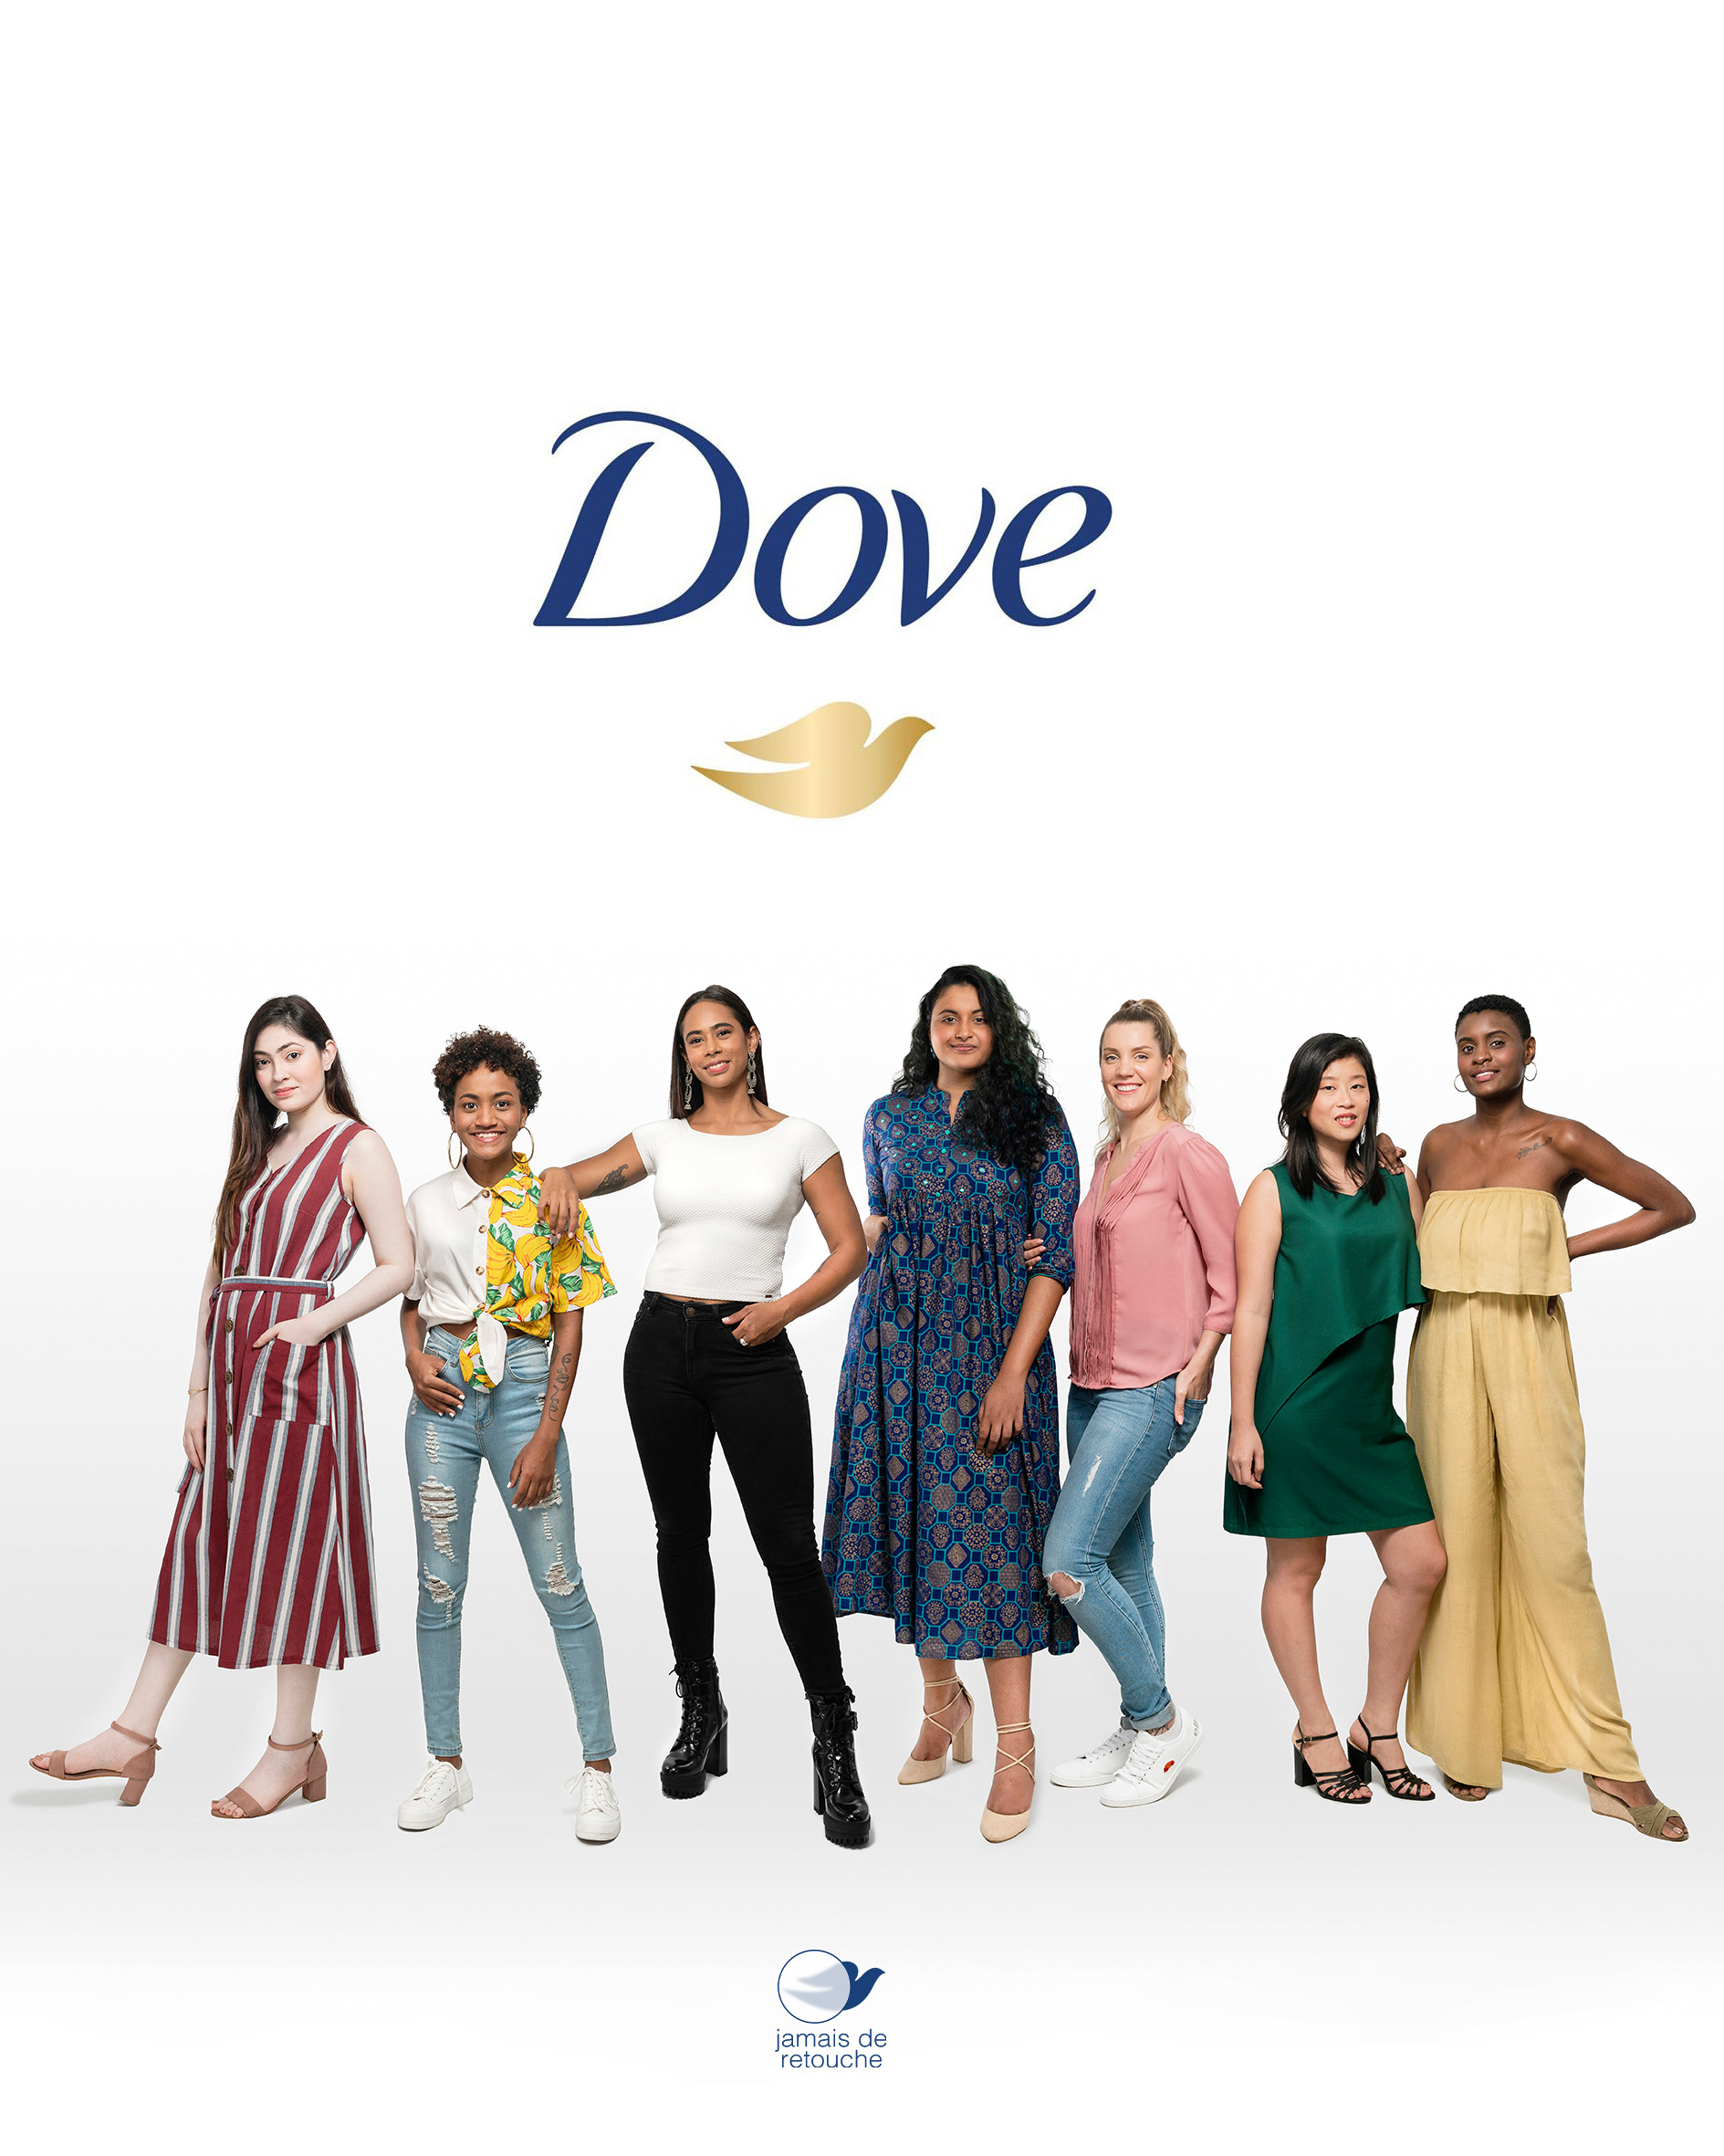 dove campaign for real beauty case study